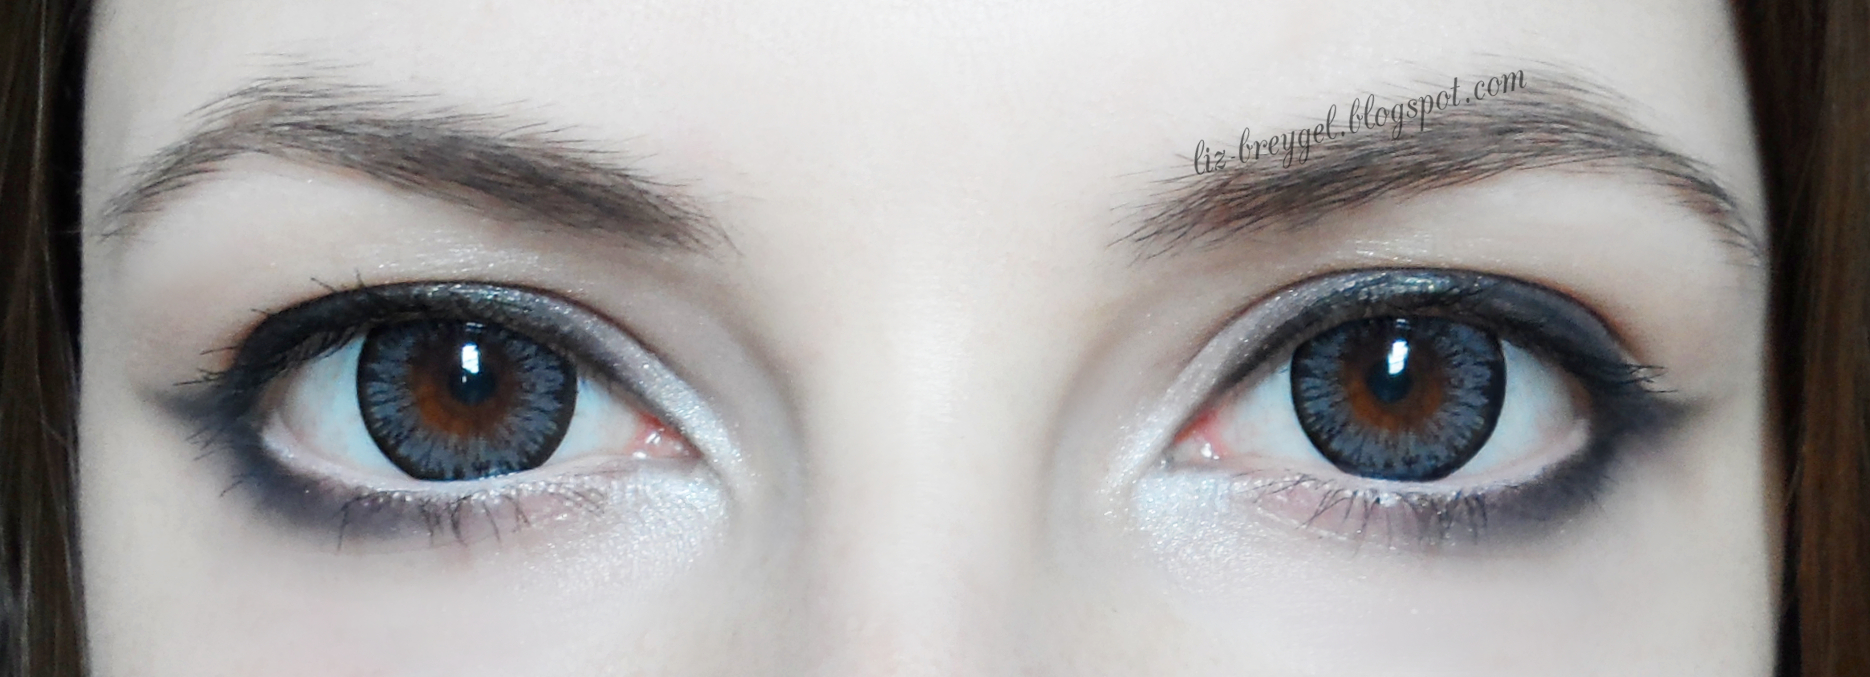 big anime doll eyes pictures and makeup with lenses